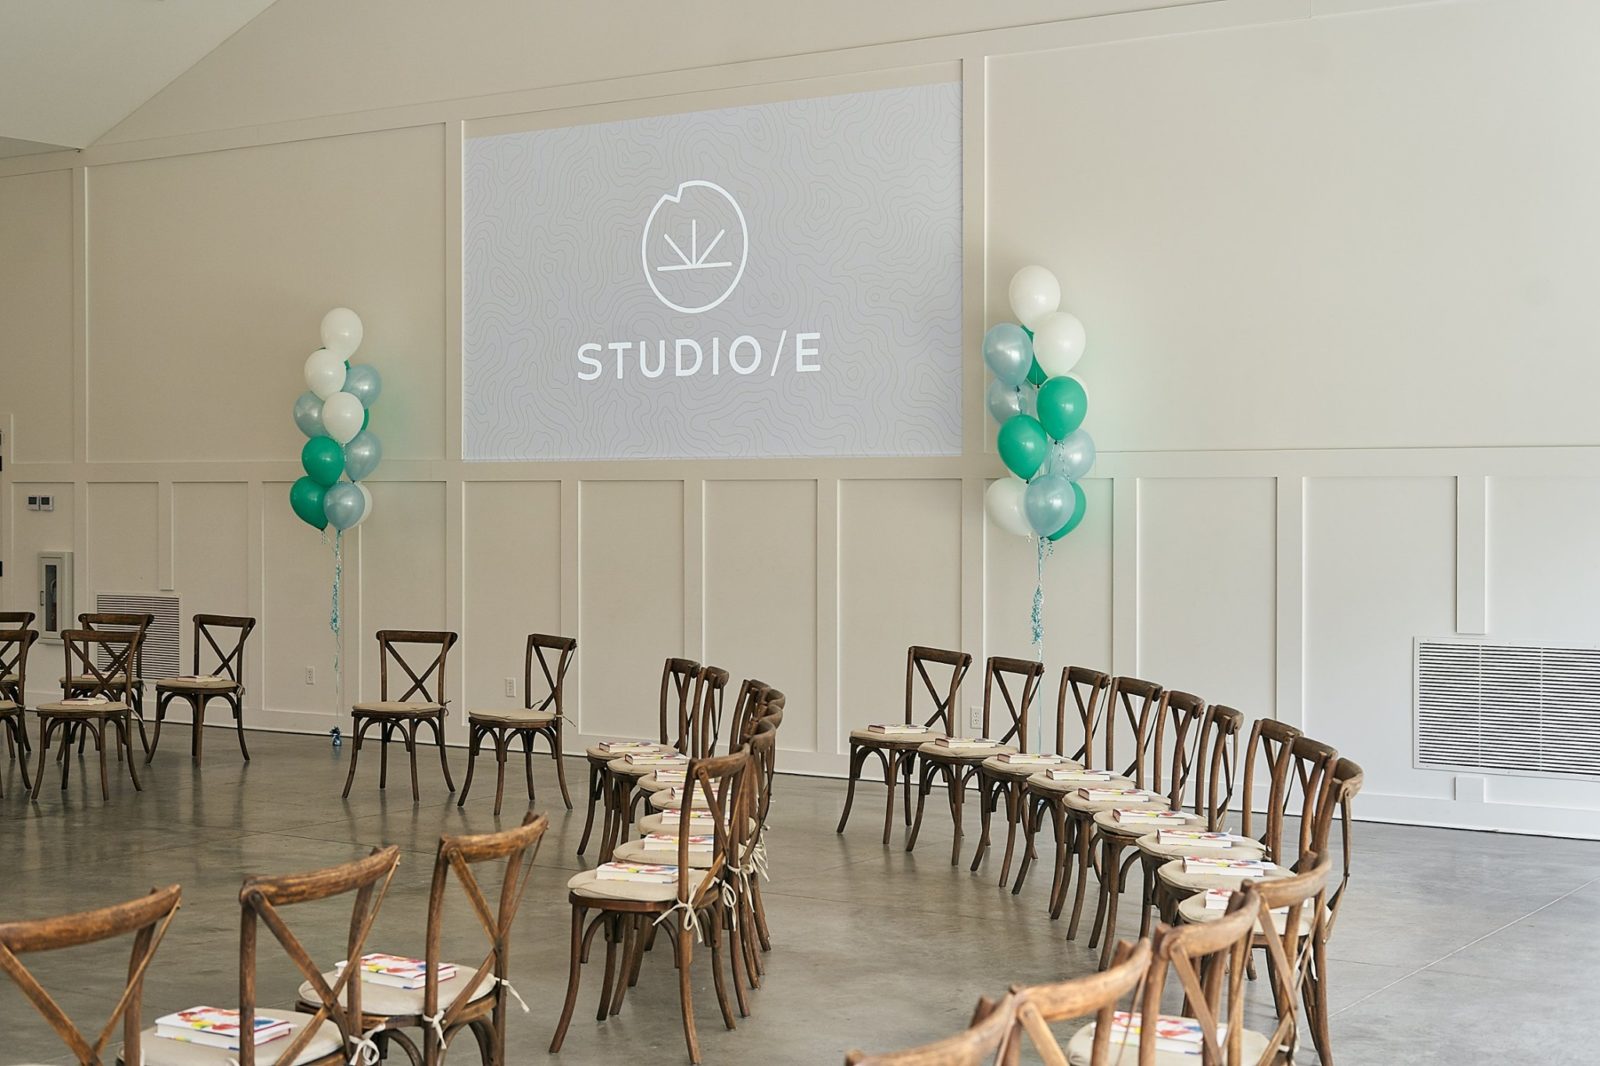 Examples of event branding at The Hutton House